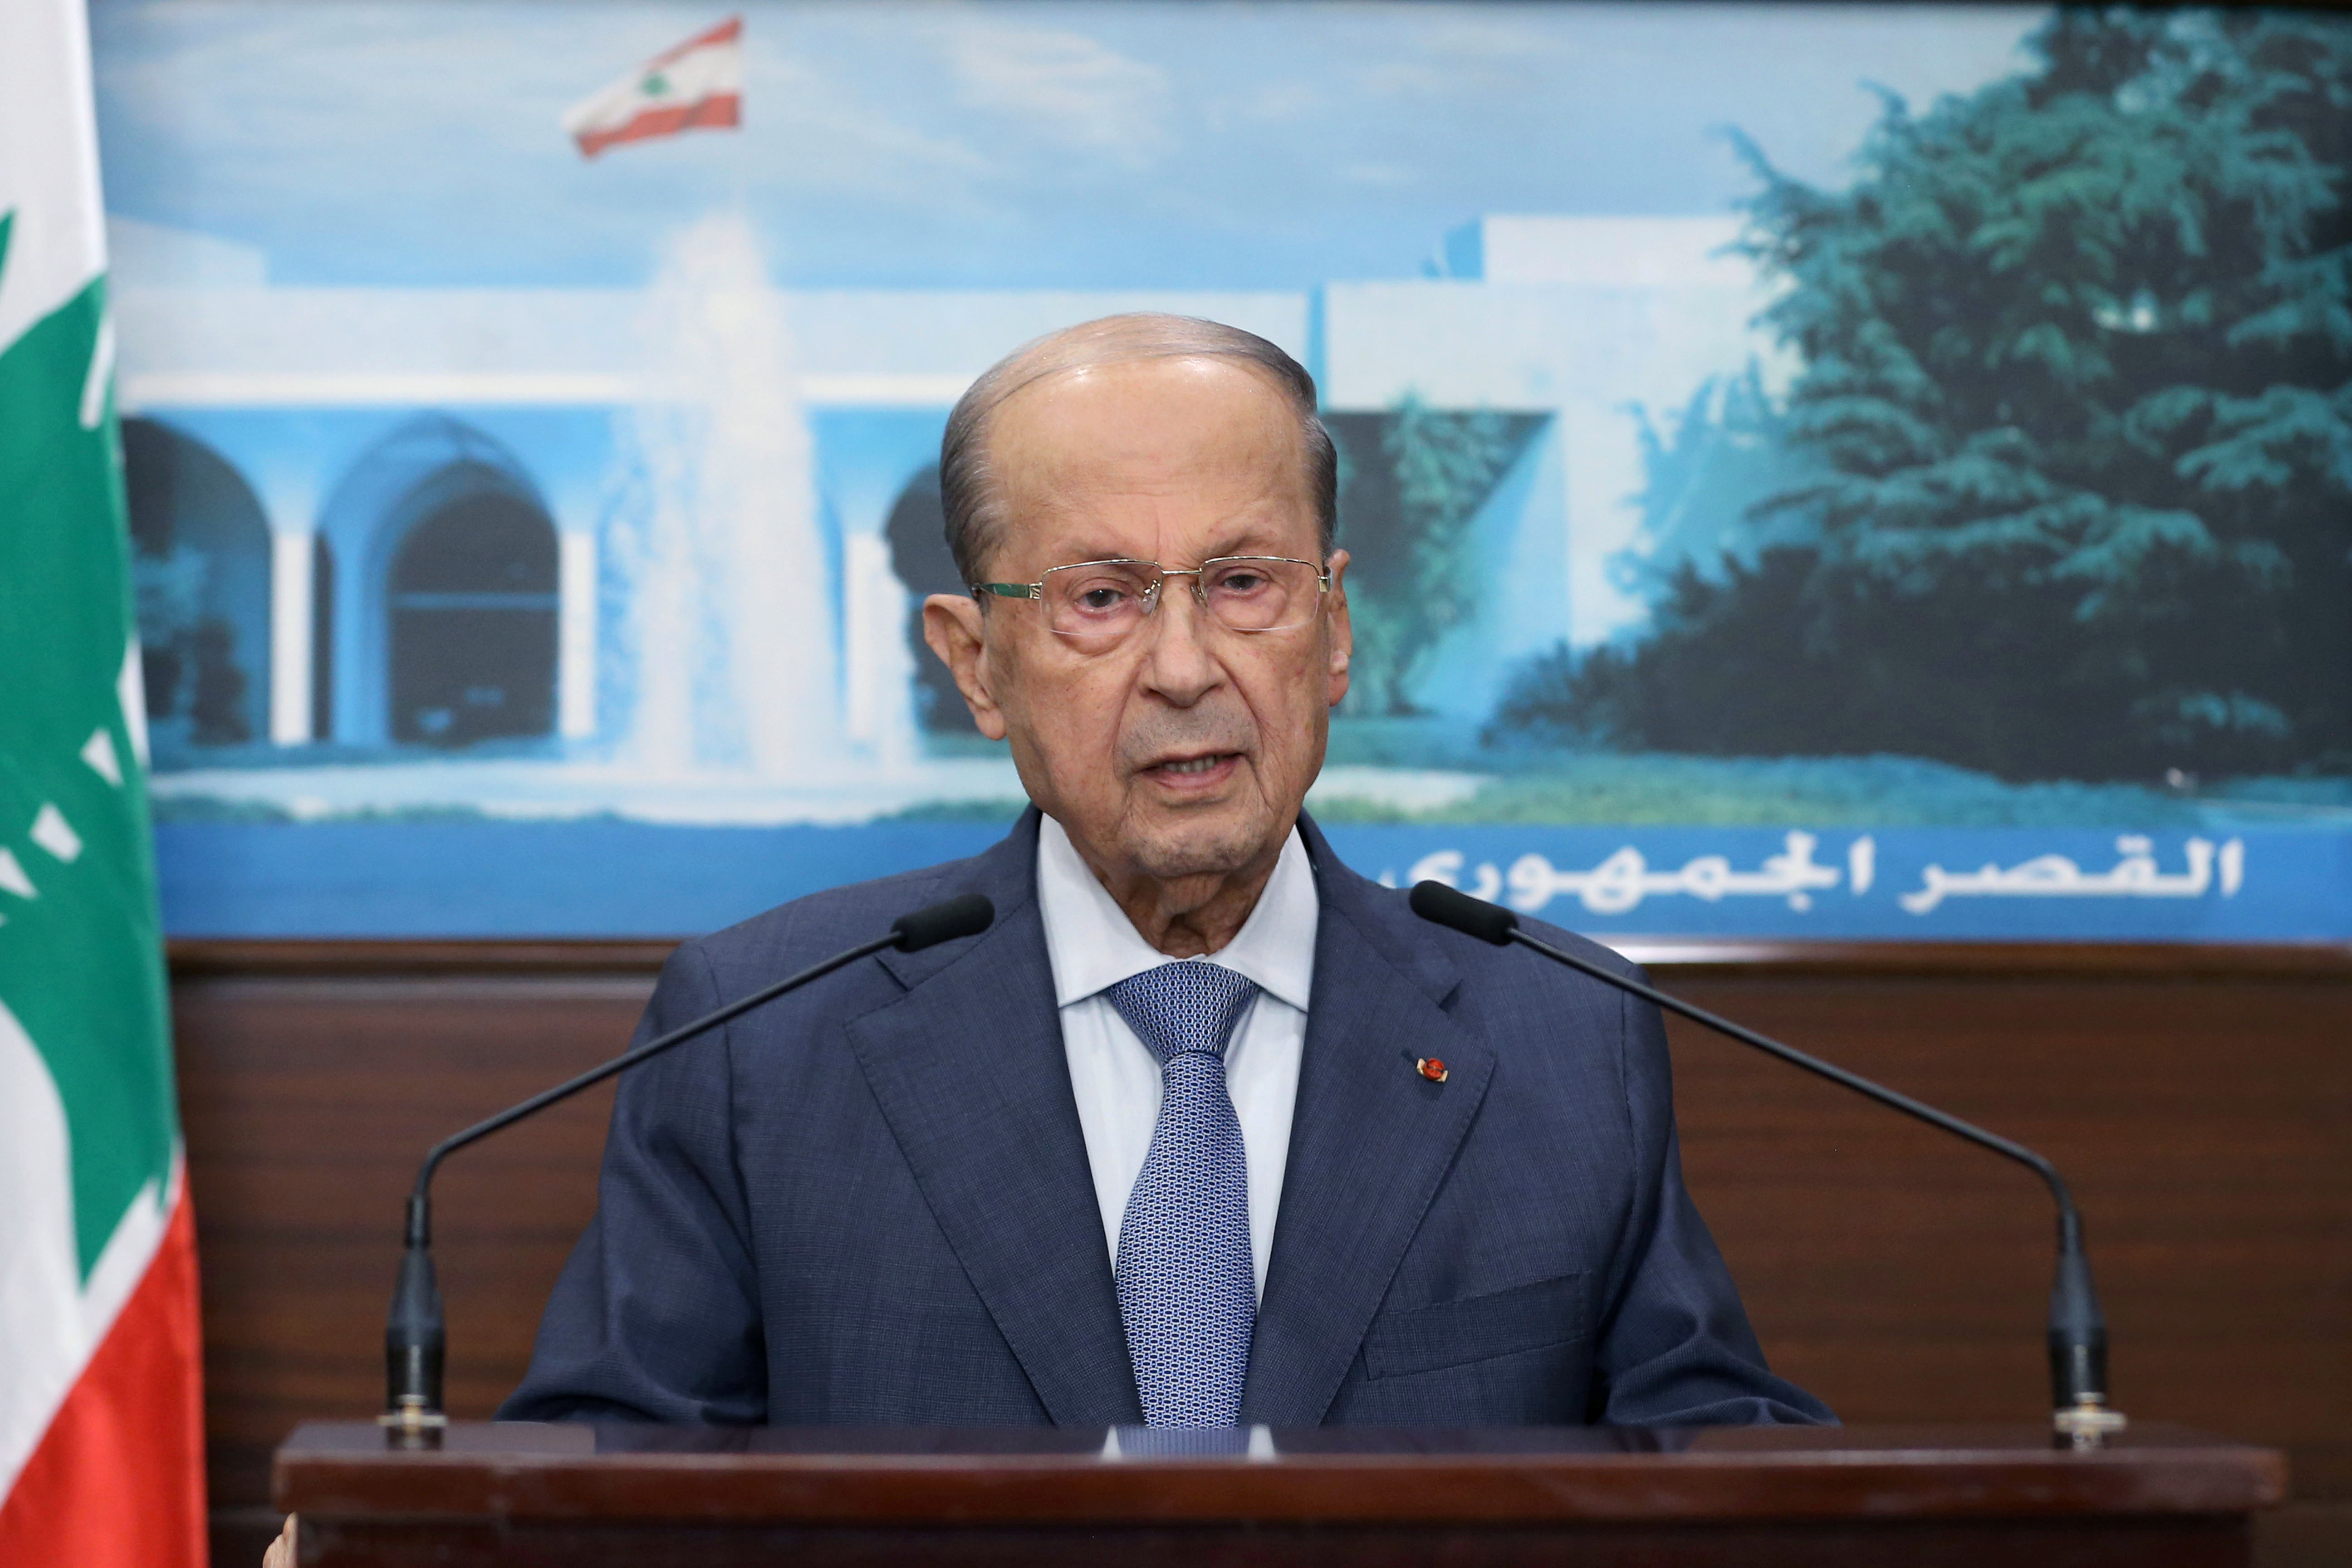 Lebanon's President Michel Aoun addresses the nation from the presidential palace in Baabda